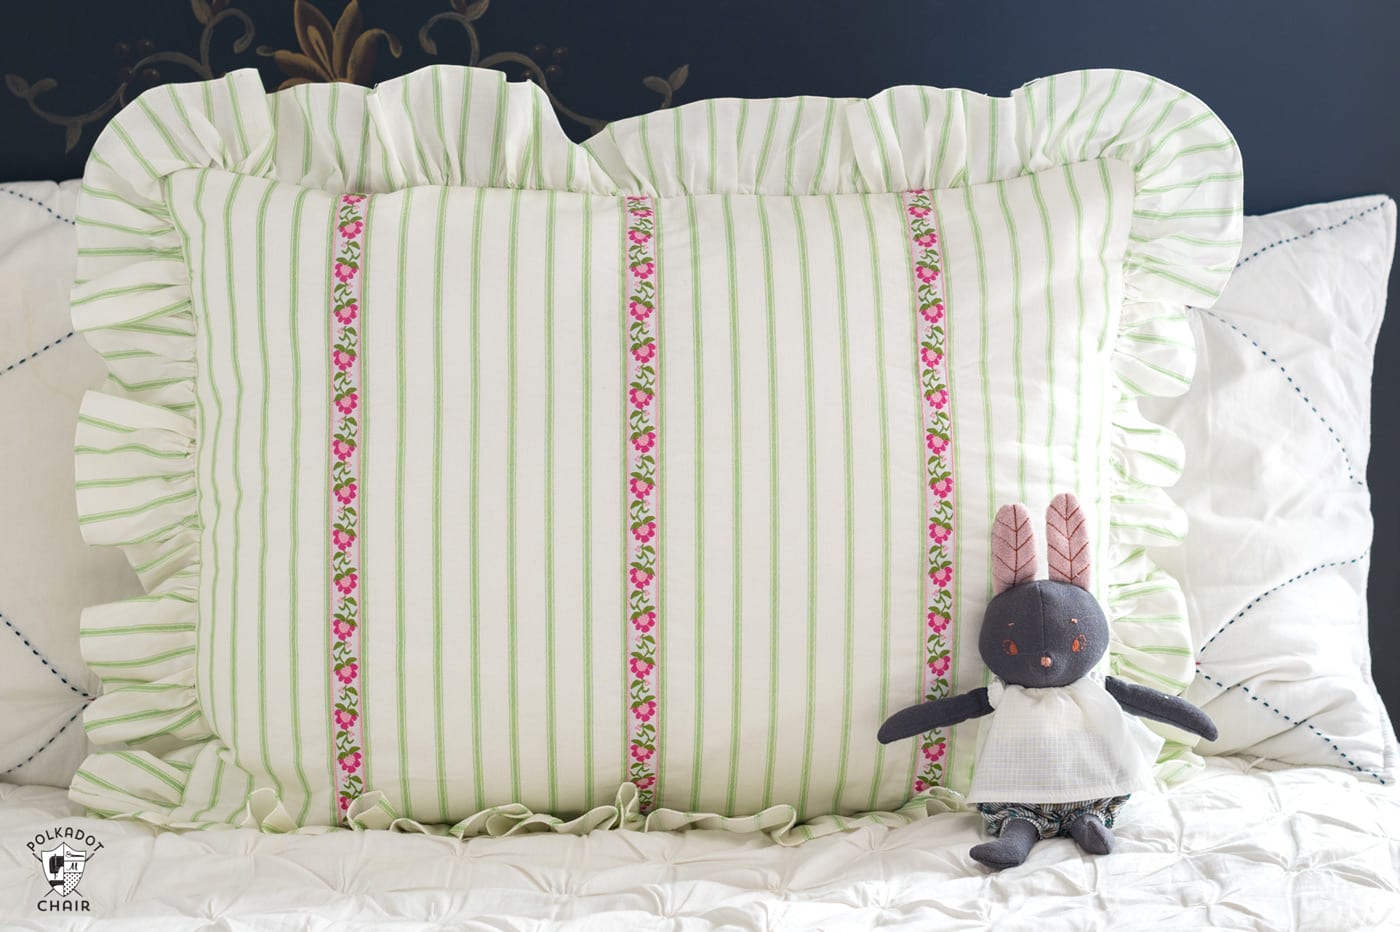 green and white striped pillow on the bed